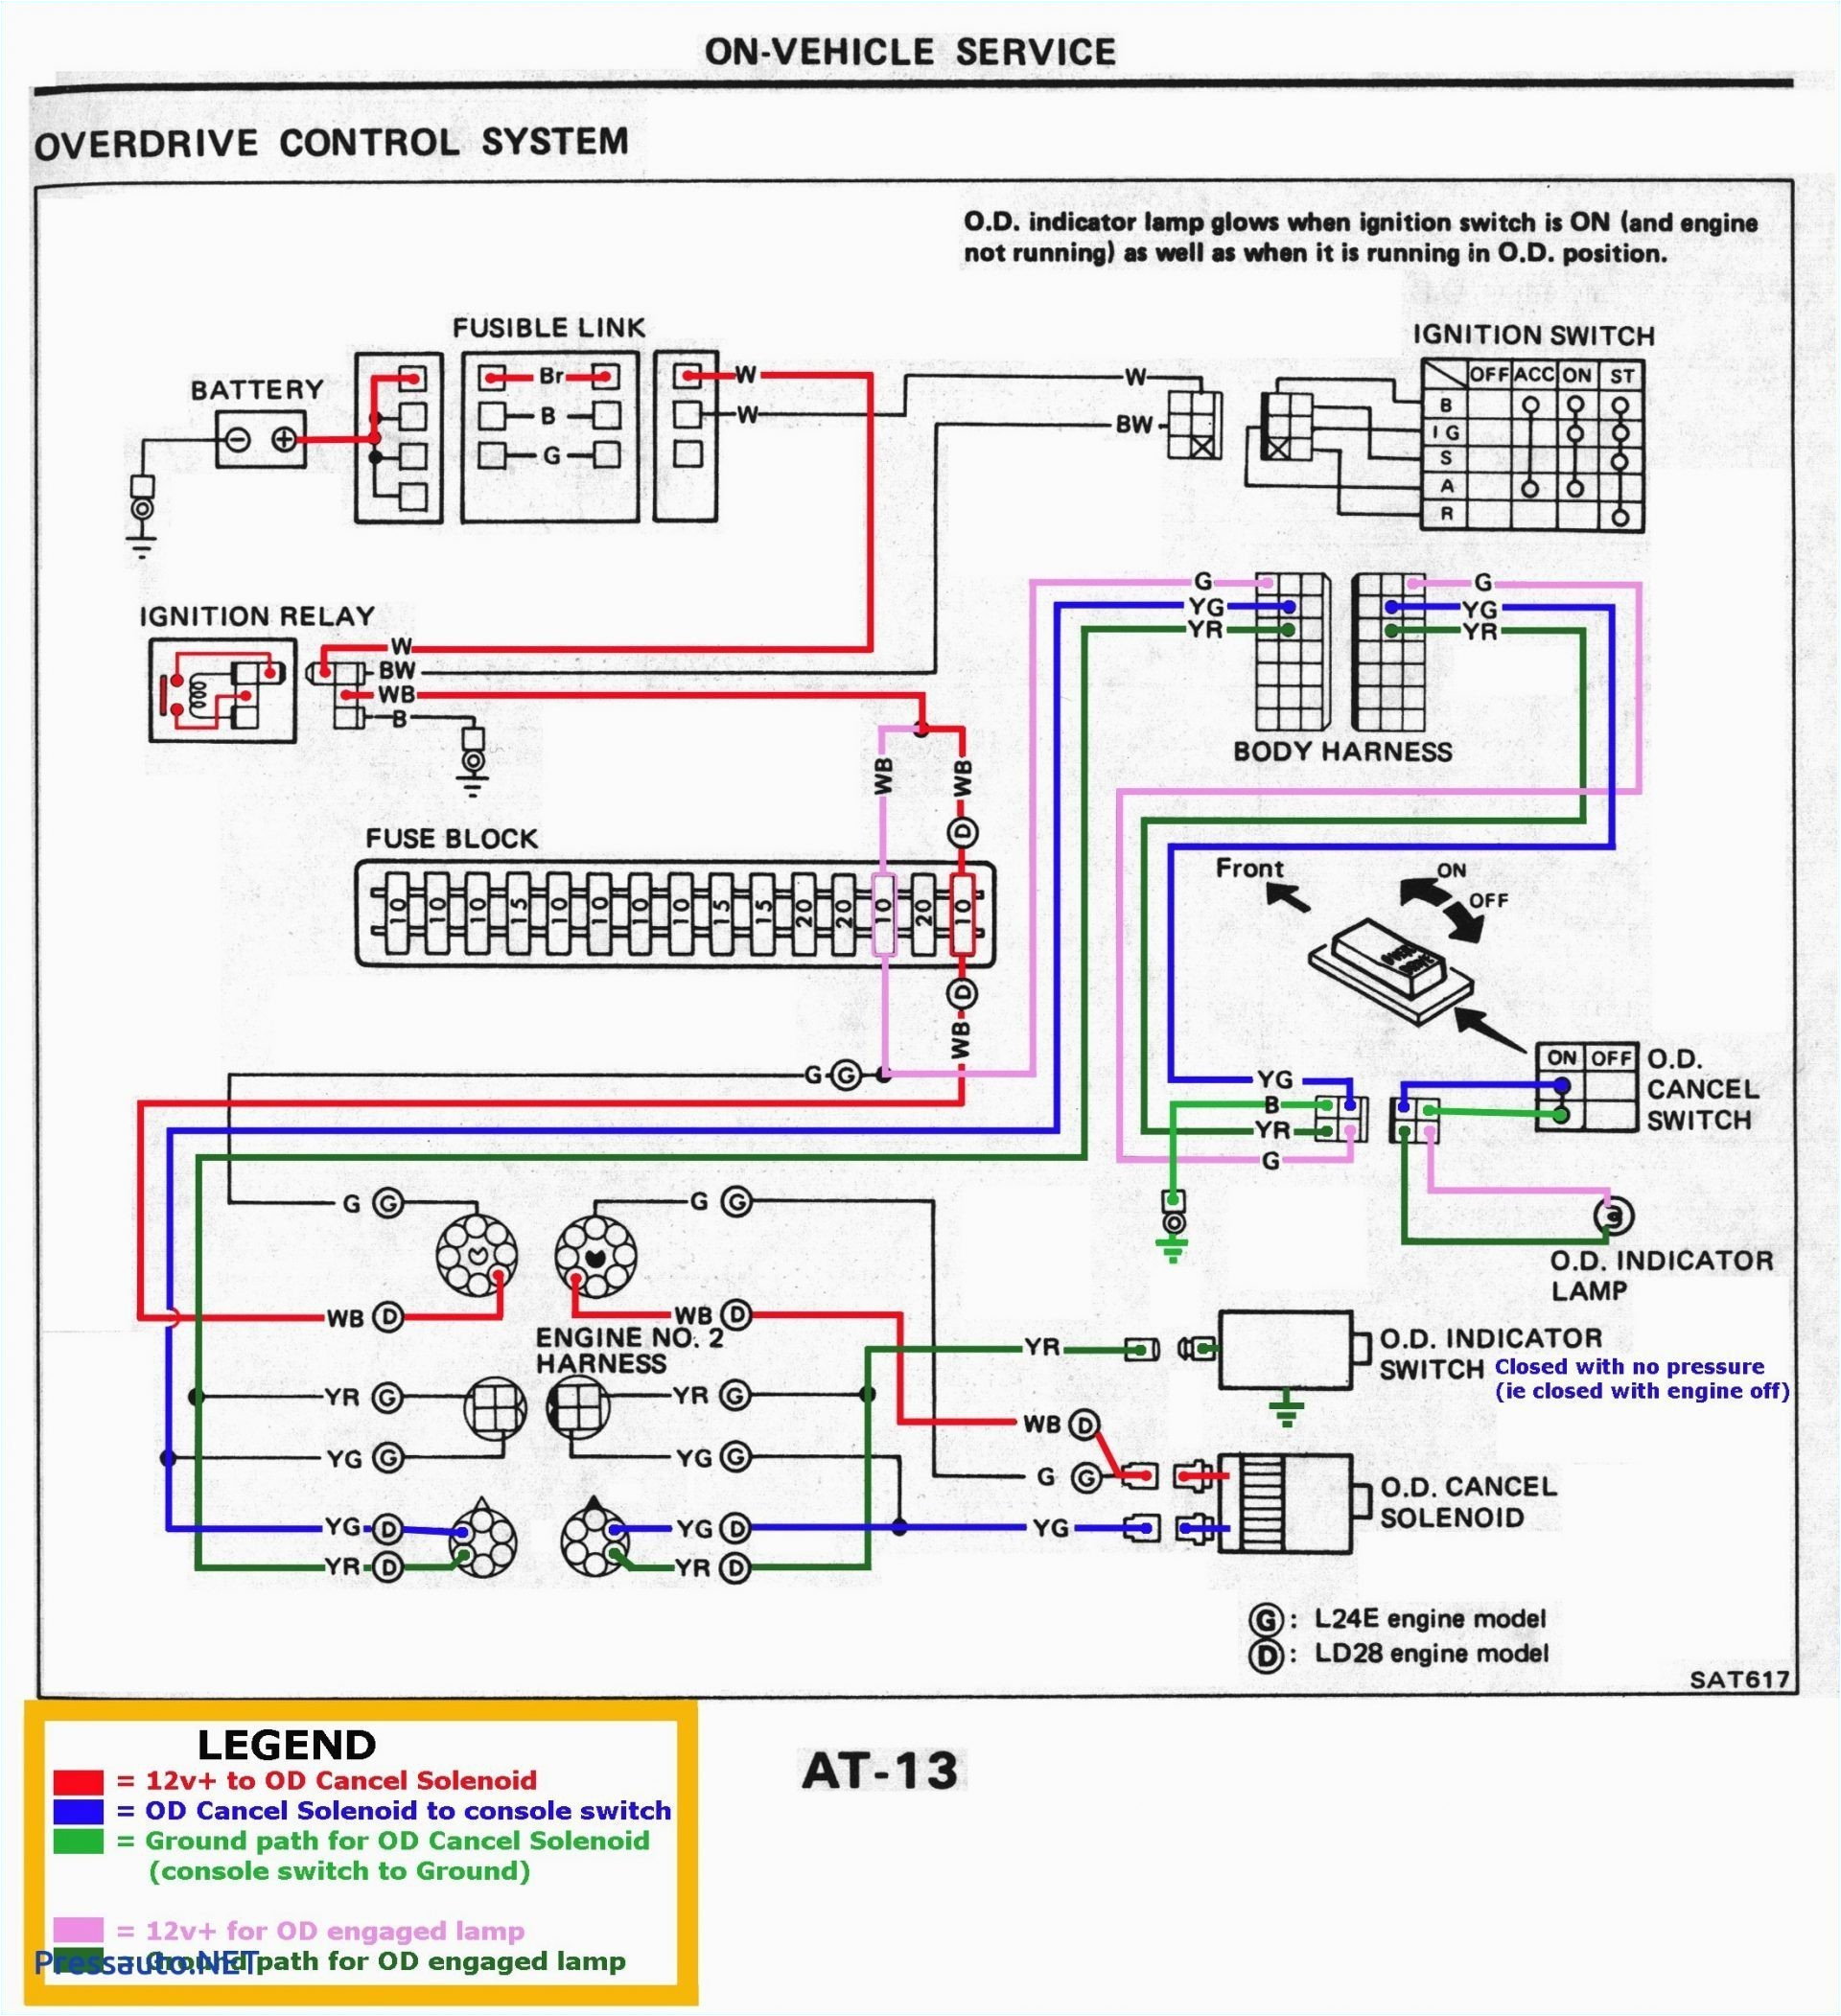 wiring diagram furthermore dodge 7 pin trailer connector furthermore diagram of a three pin plug wiring moreover spark plug wires diagram